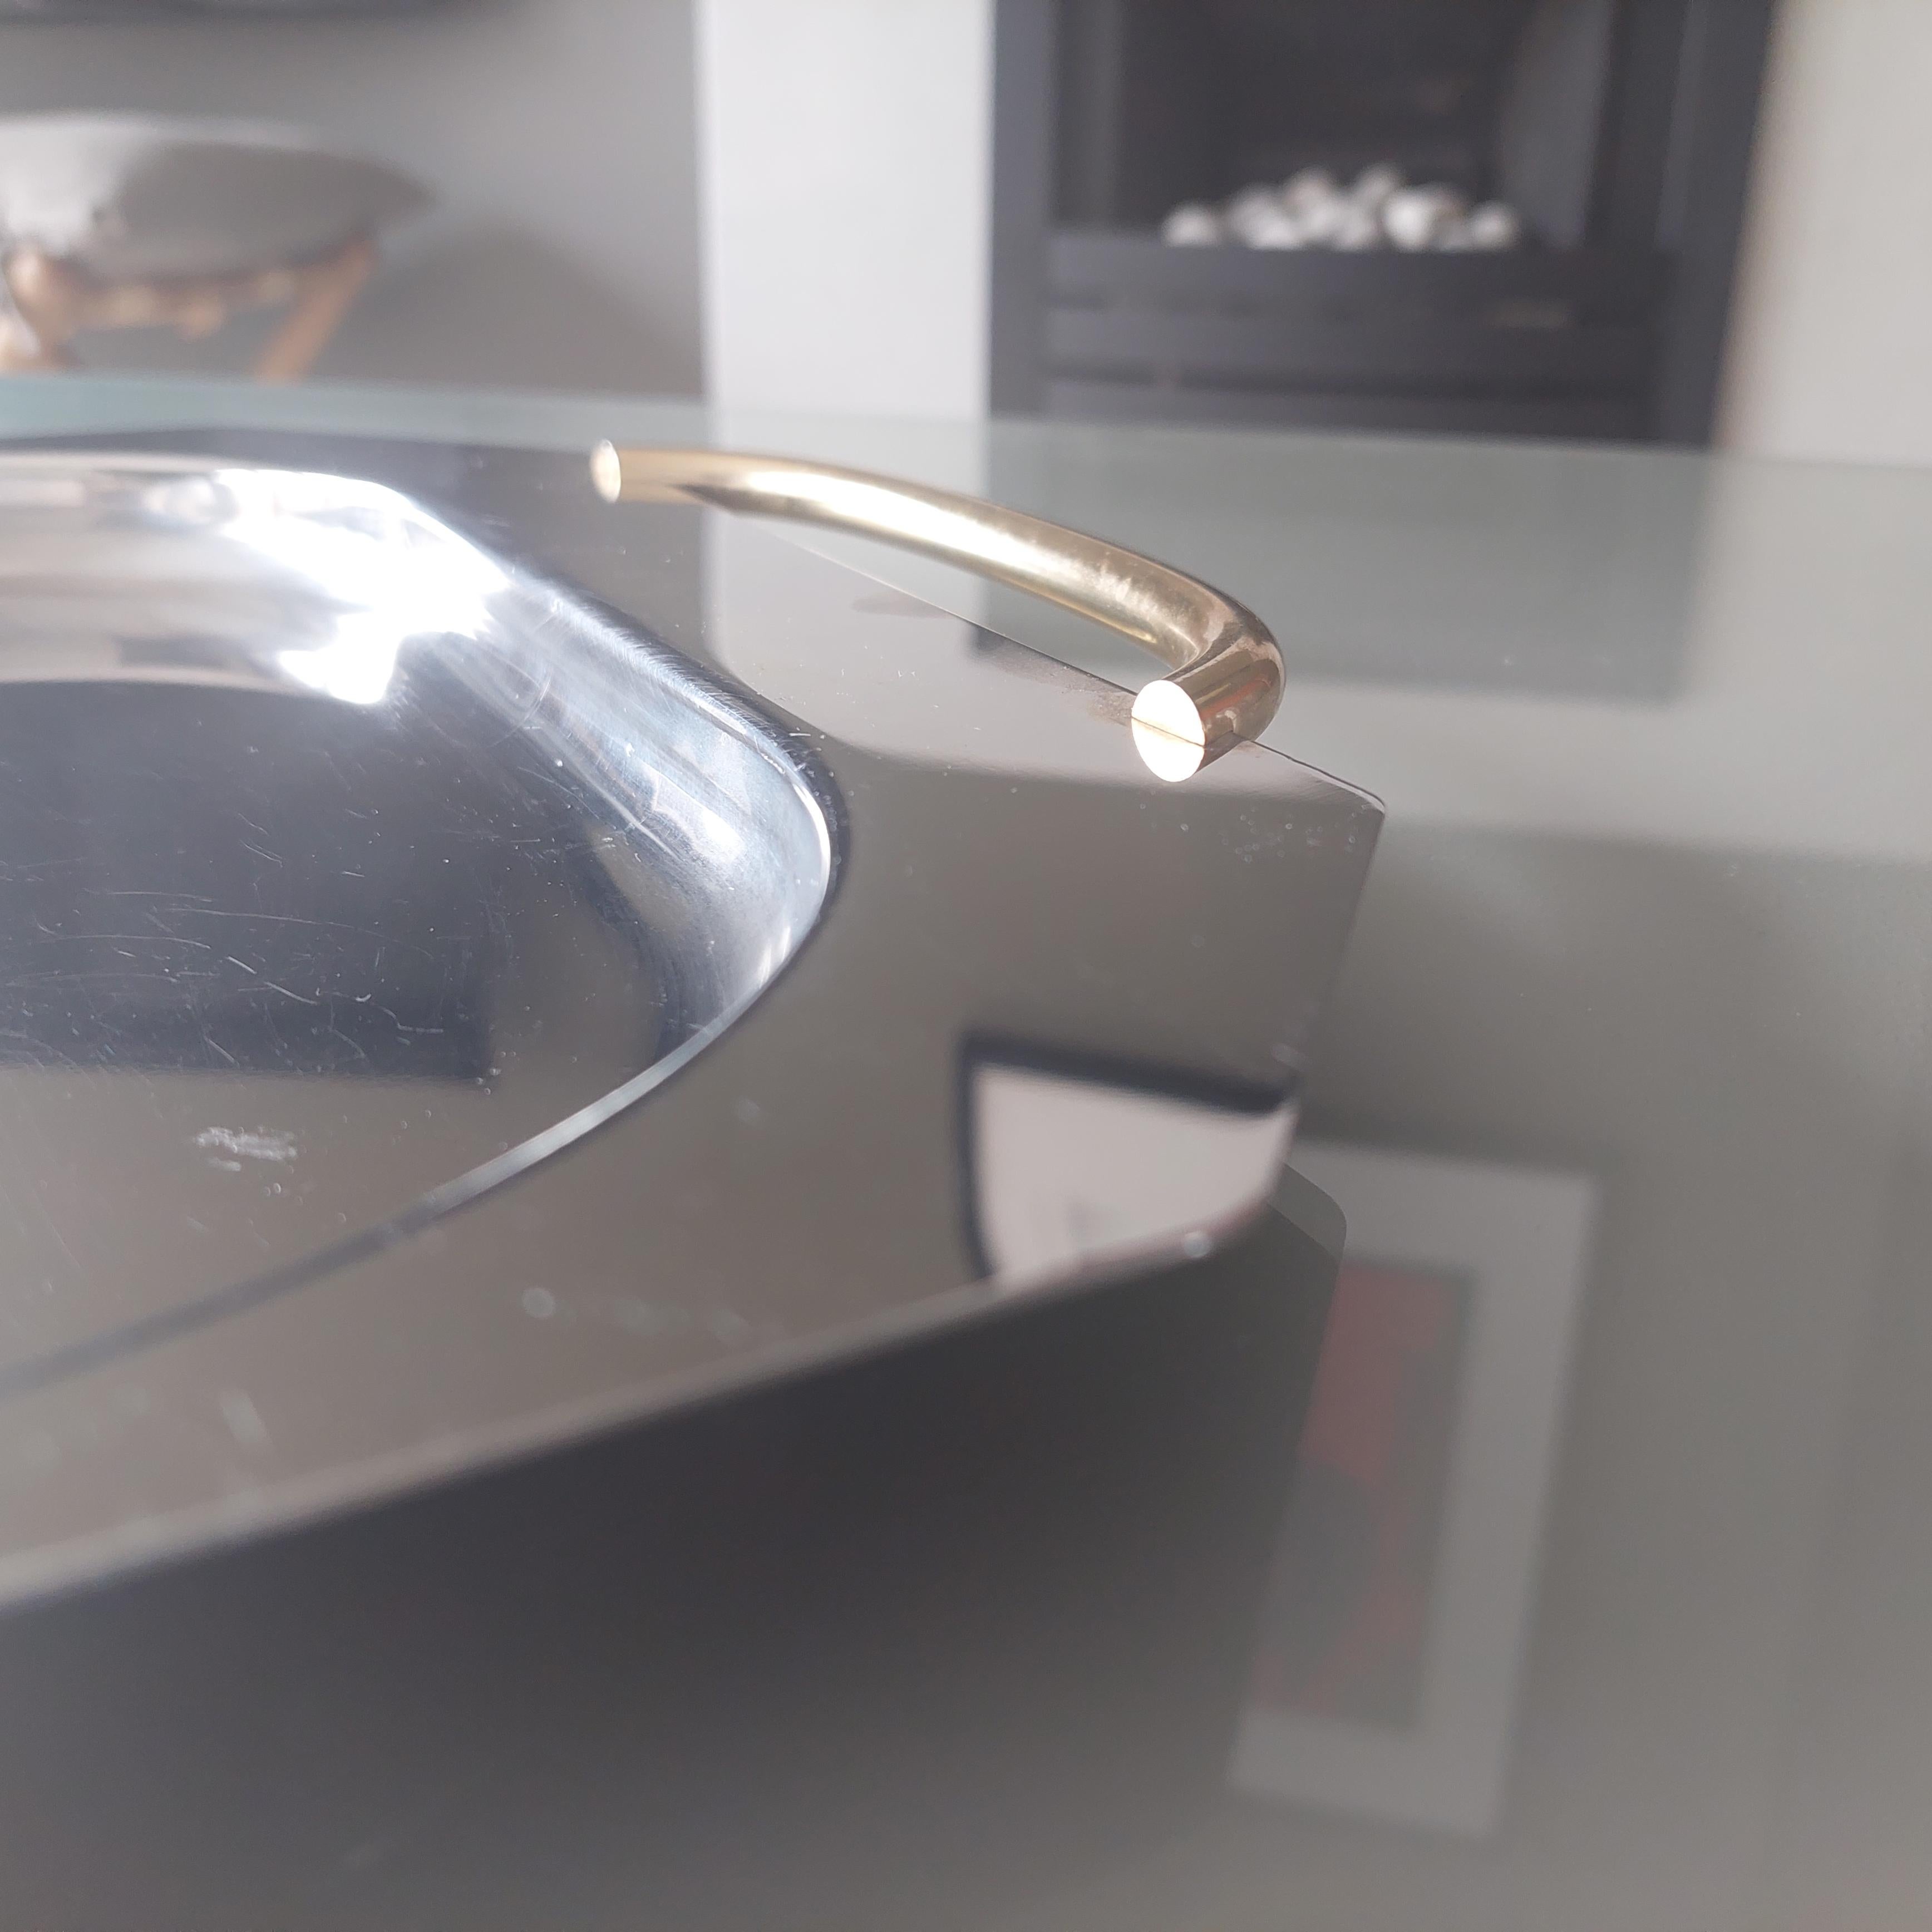 Rectangular Stainles Steel Centerpiece Serving Tray, Inox 18/10 Tsl, Italy, 1970 For Sale 4